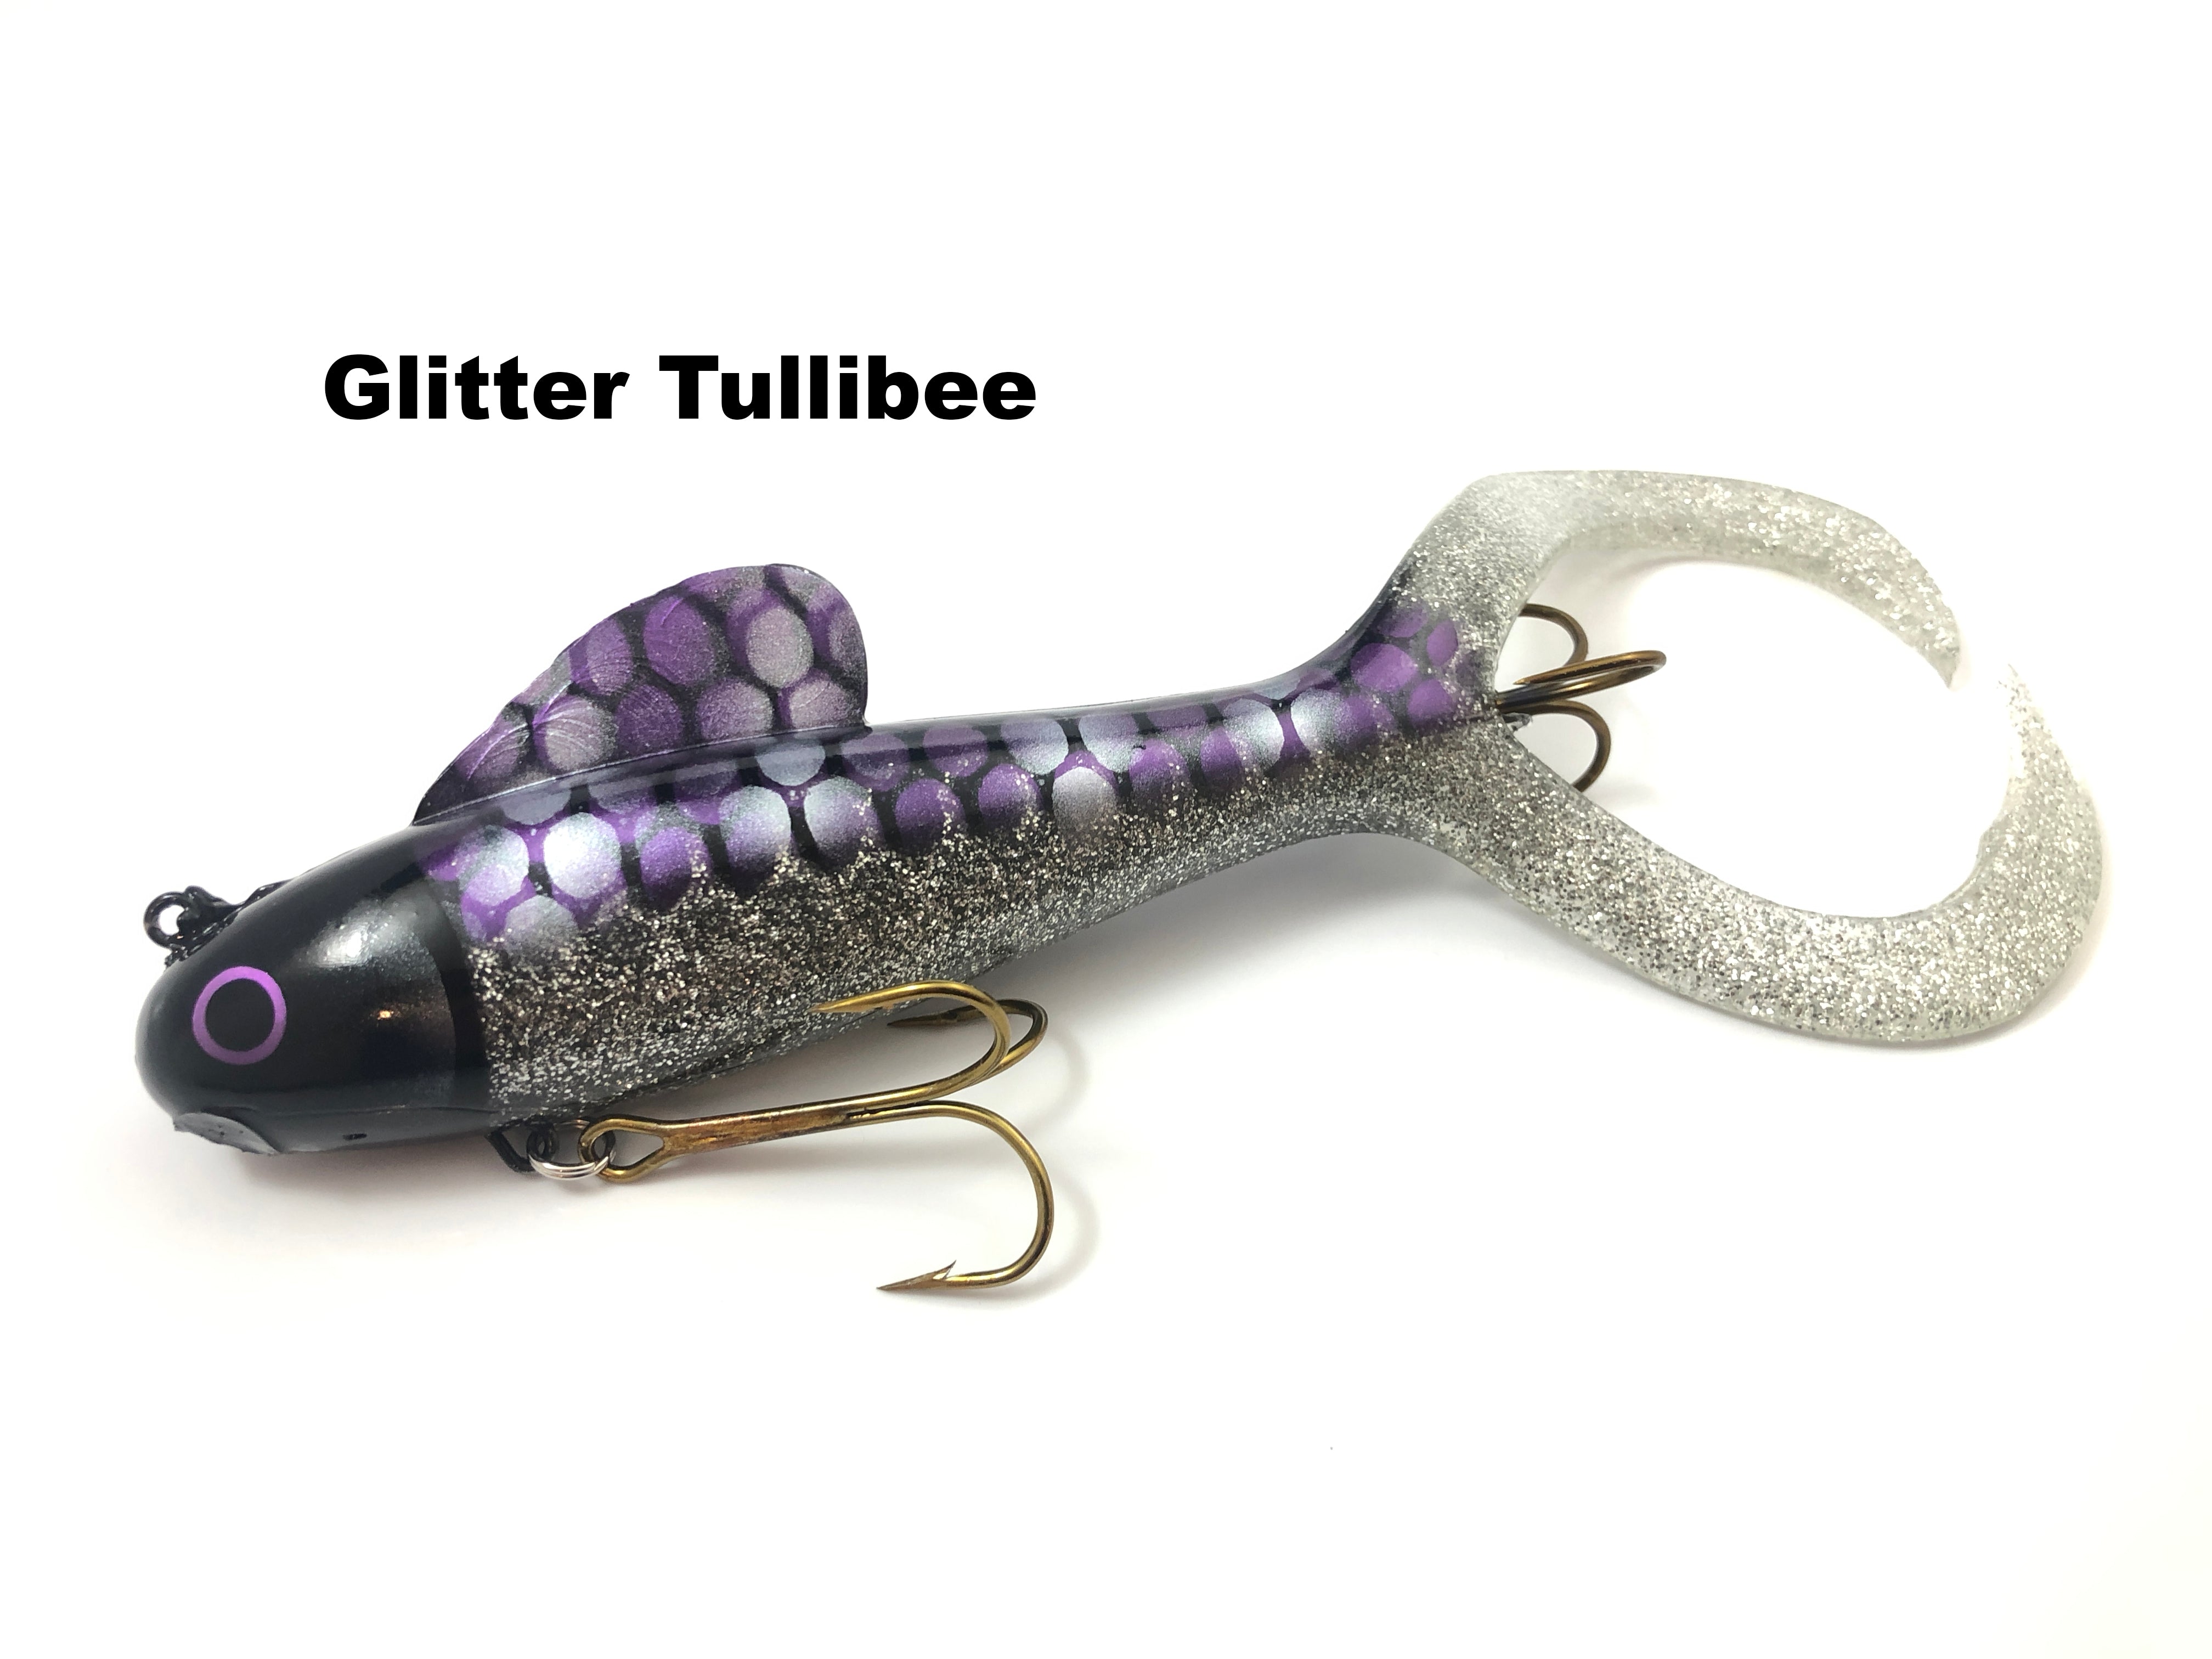 Handlebarz Musky Lures, Just in case you were wondering what the action on  chewies are here is a quick video we did the Glitter Walleye has been  bagging a lot of